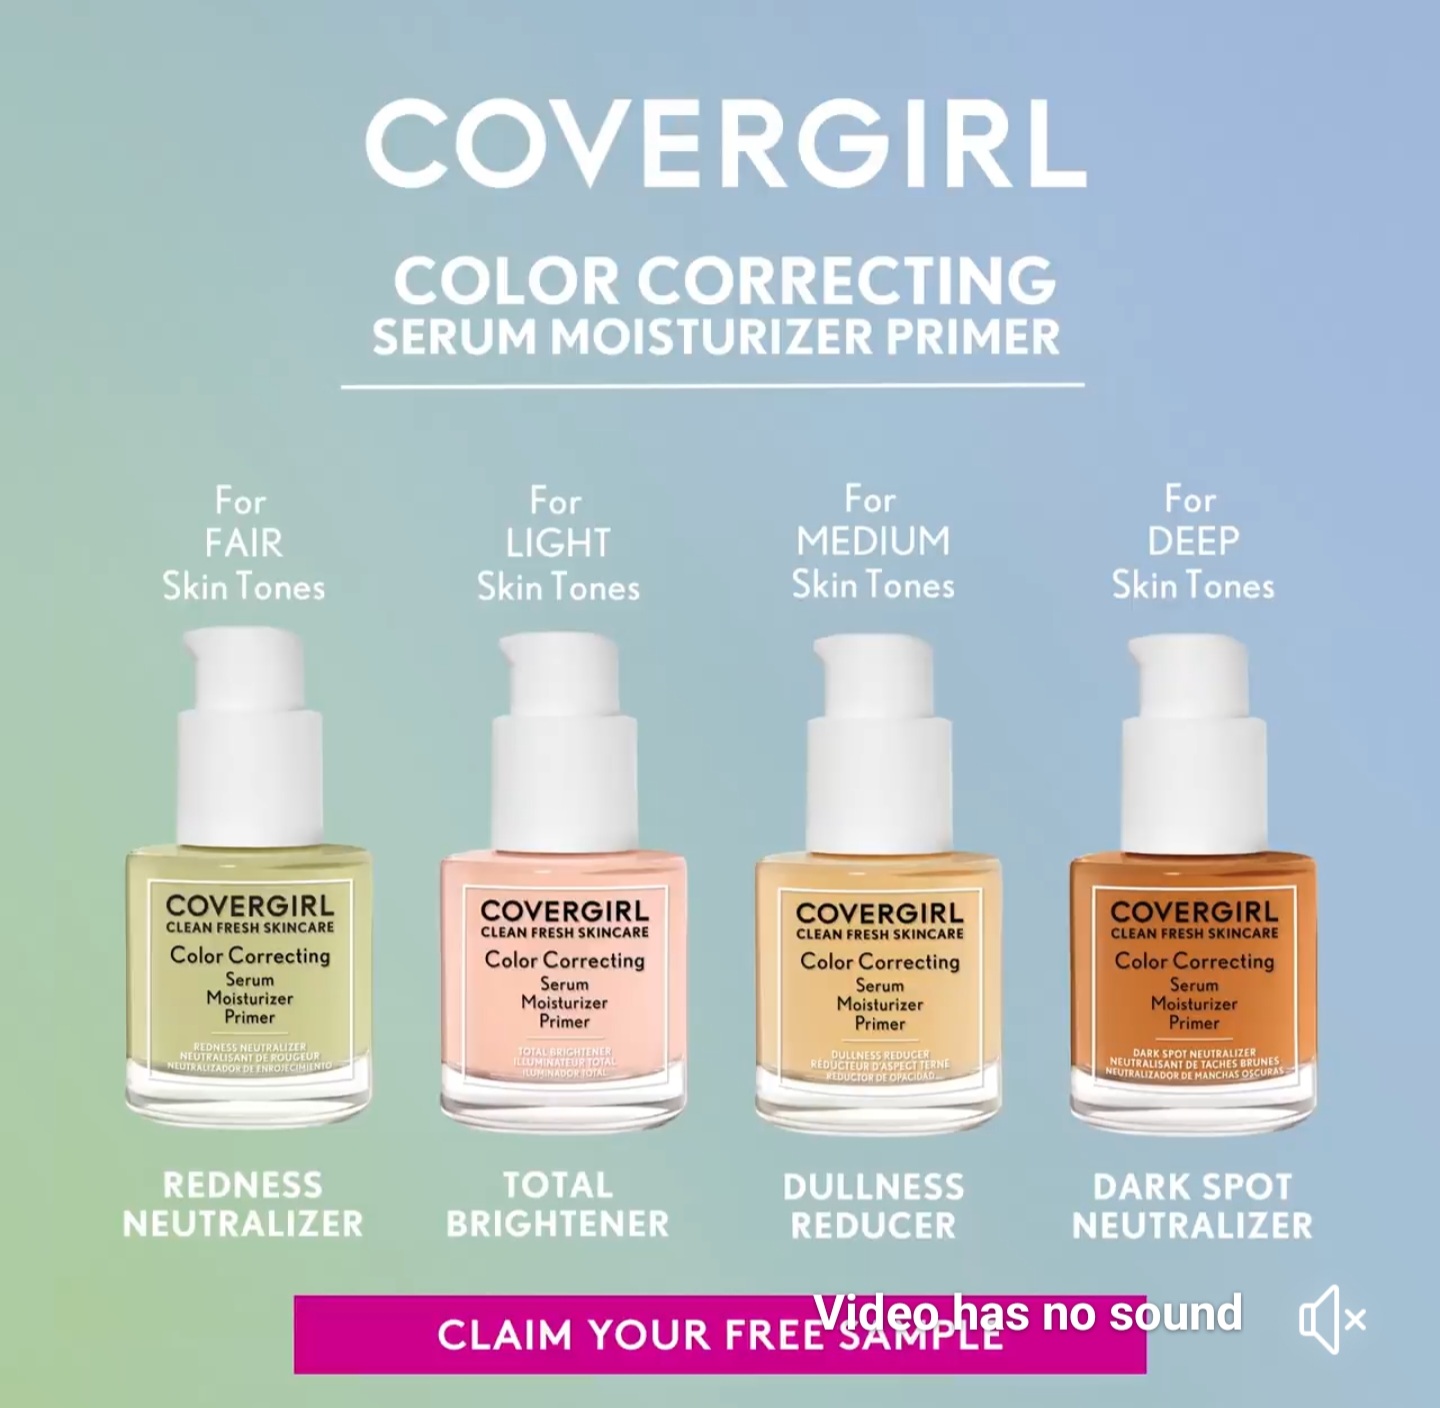 Free Sample of CoverGirl Clean Fresh Color Correcting Serum